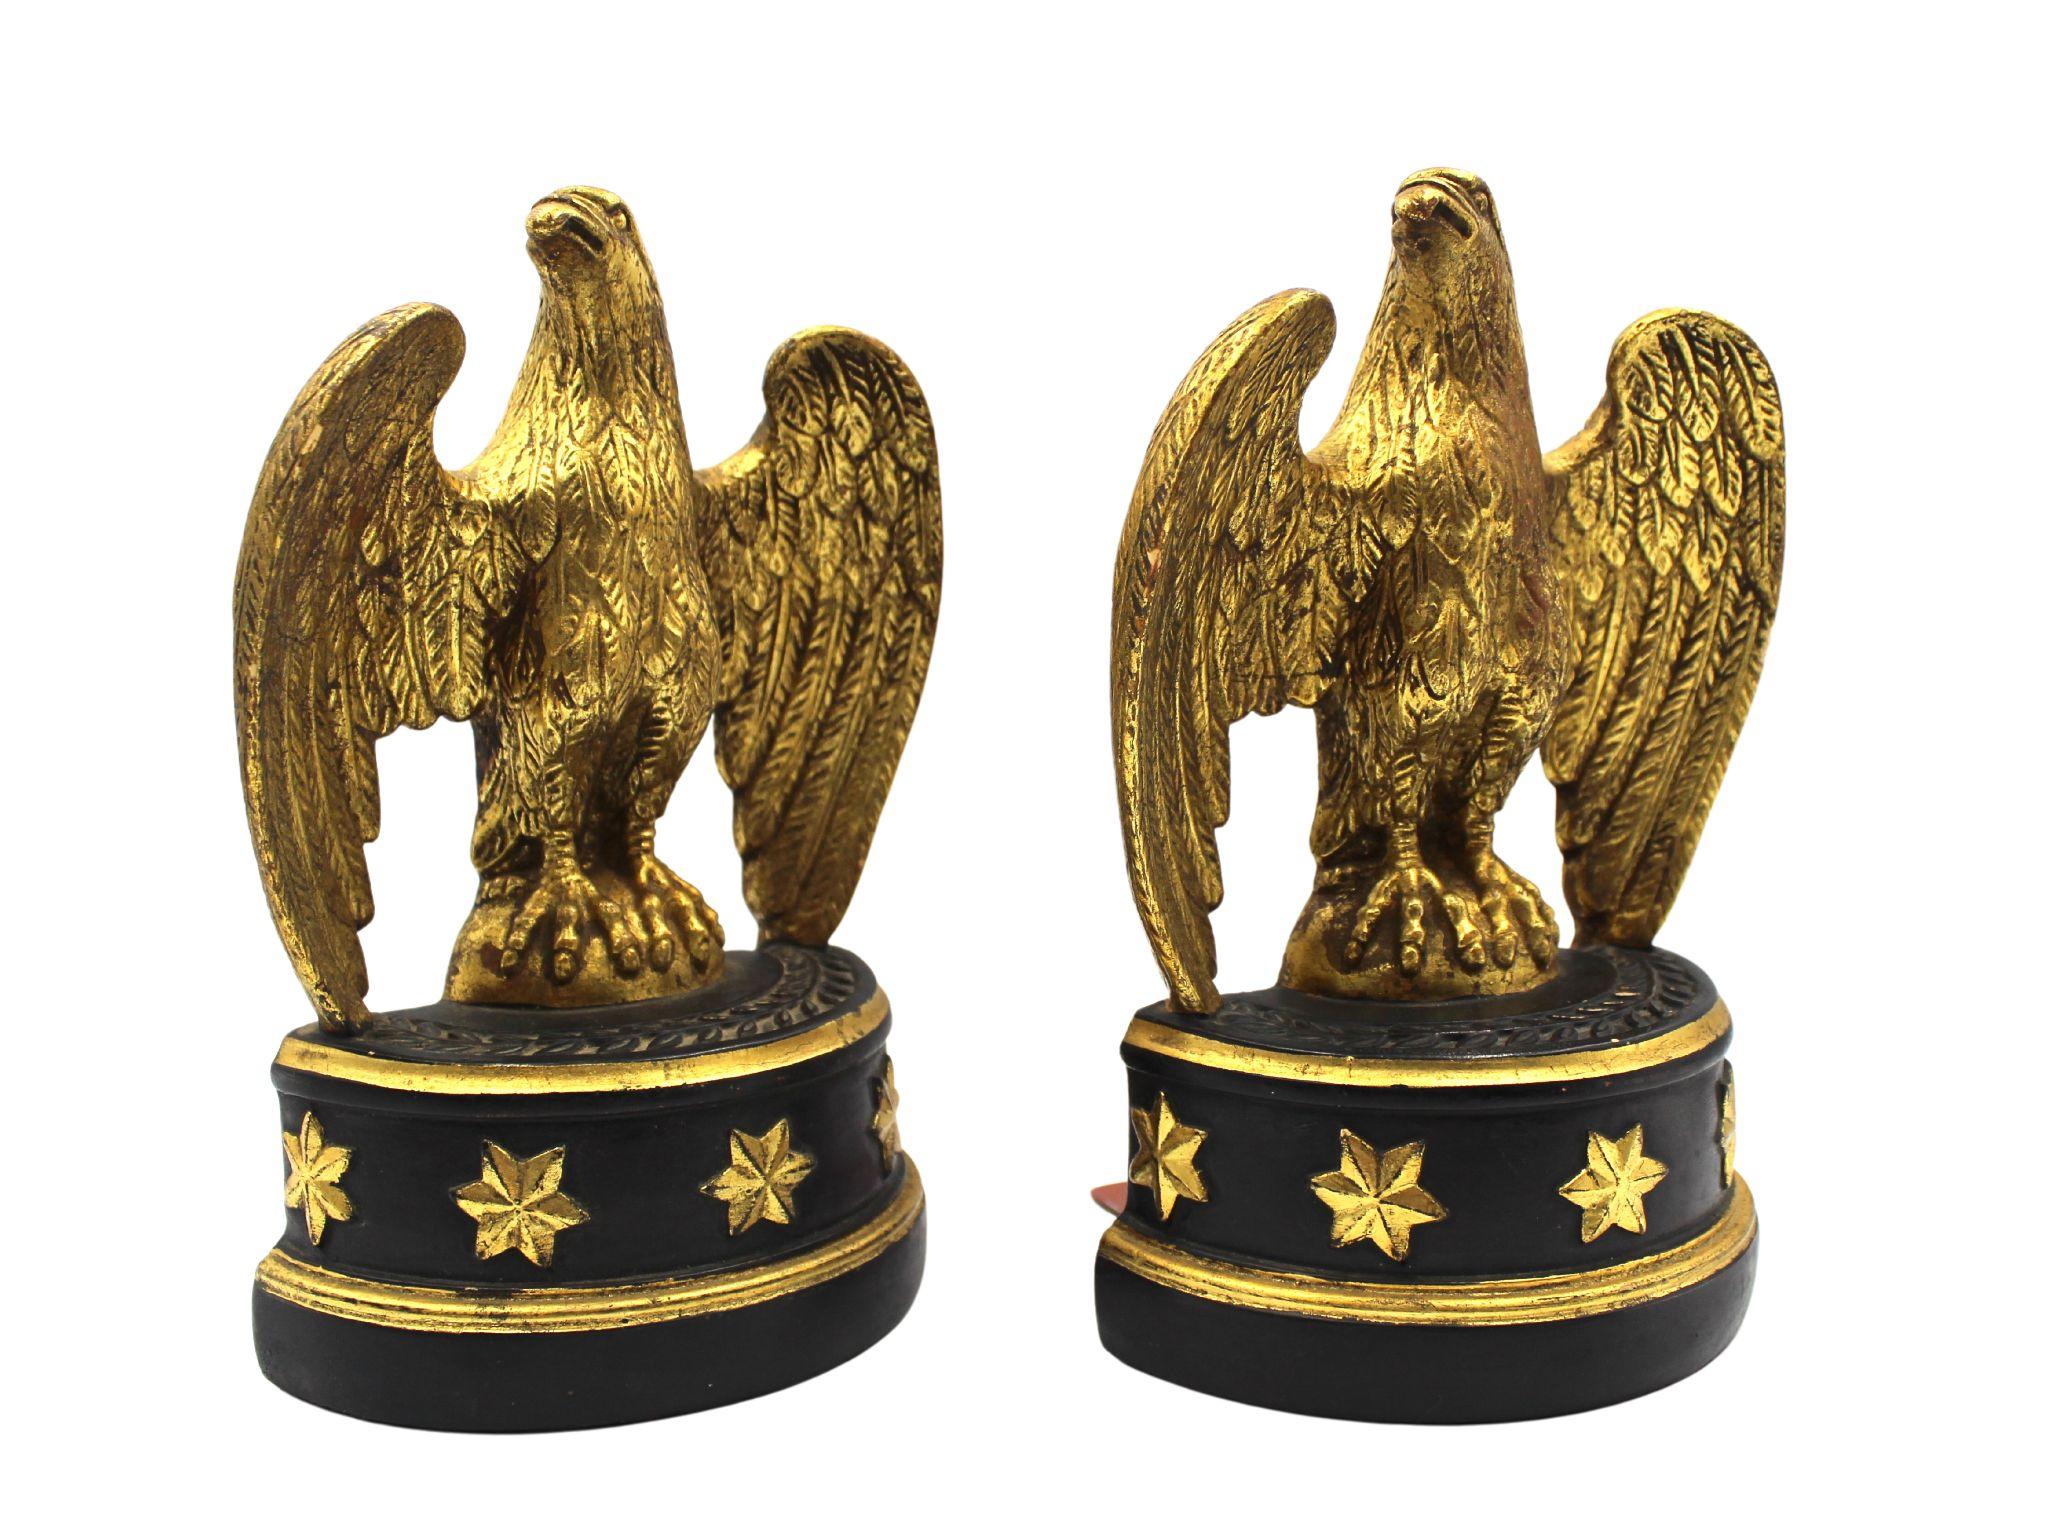 Presented is a pair of vintage plaster cast American Eagle bookends. The bookends were designed by Borghese of Italy, in a Federal style, with a black base and five gold stars. This beautiful bookend pair is the same style as seen in photos of John